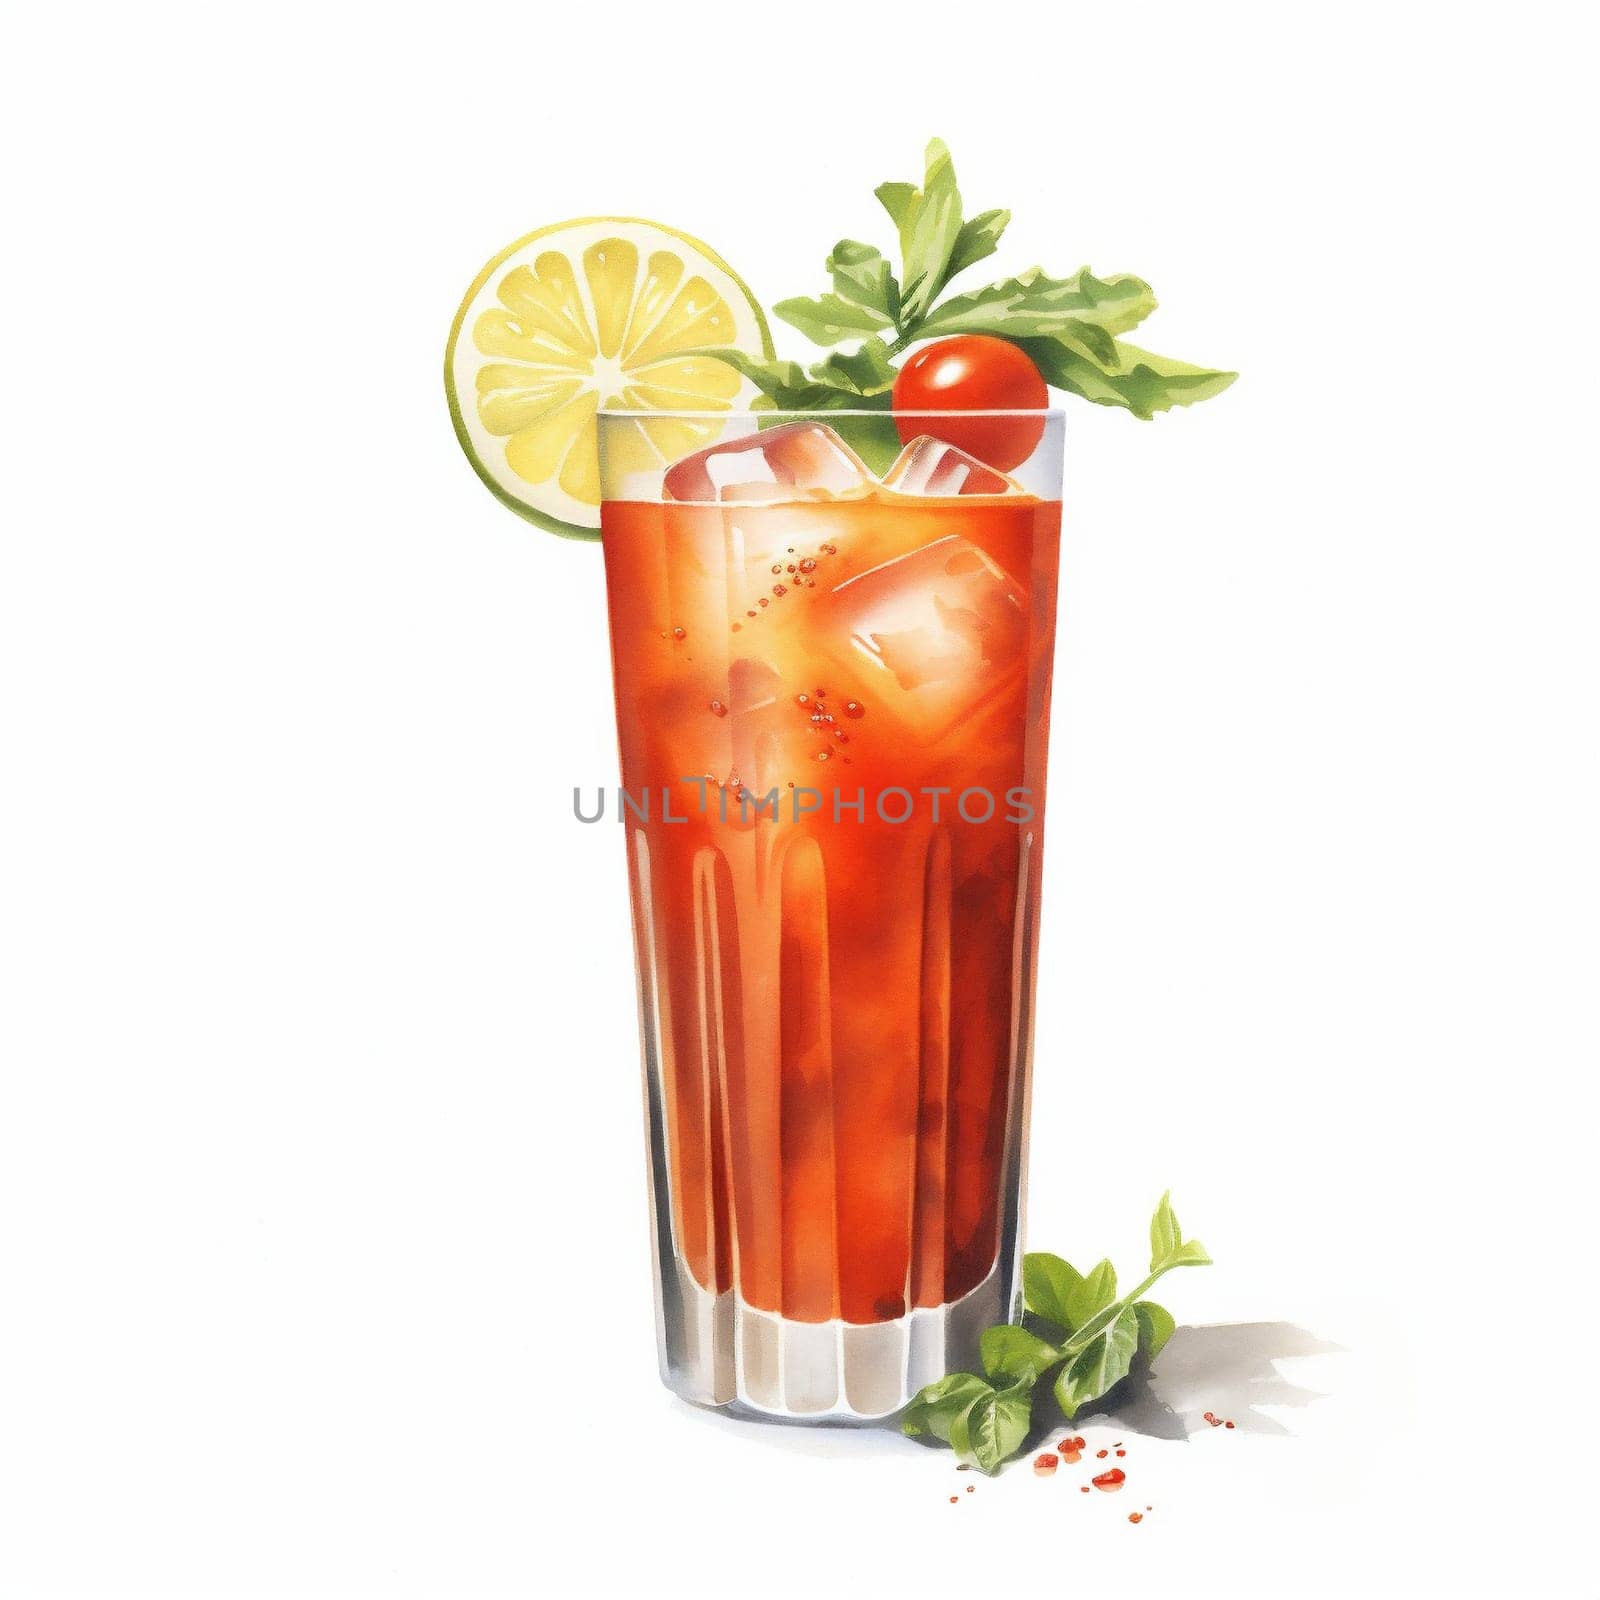 Cocktail Bloody Mary with Cherry Tomatoes and Celery Leaves. Hand Drawn Bloody Mary Sketch on White Background.